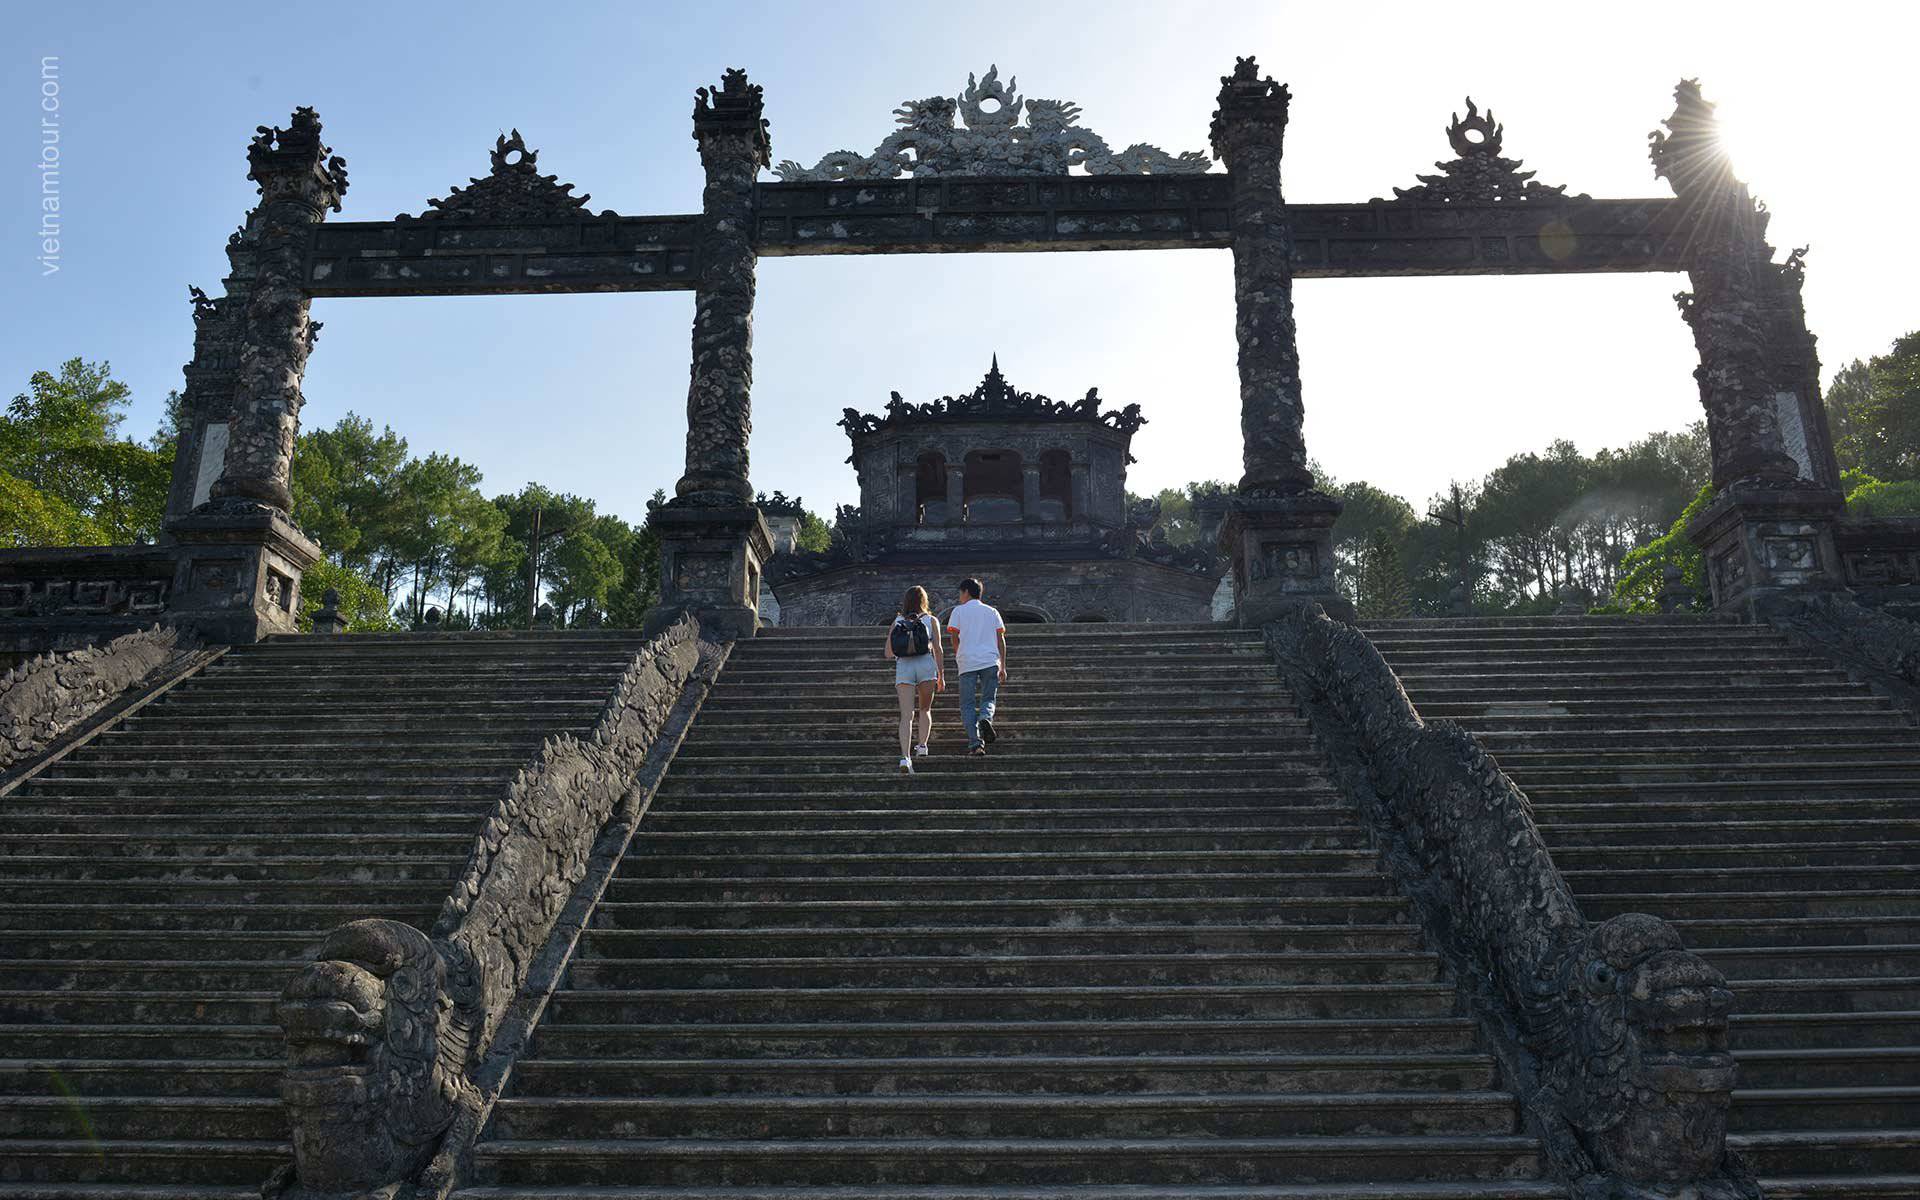 Visiting Cultural sites and discover Vietnam history of 4 thousand years